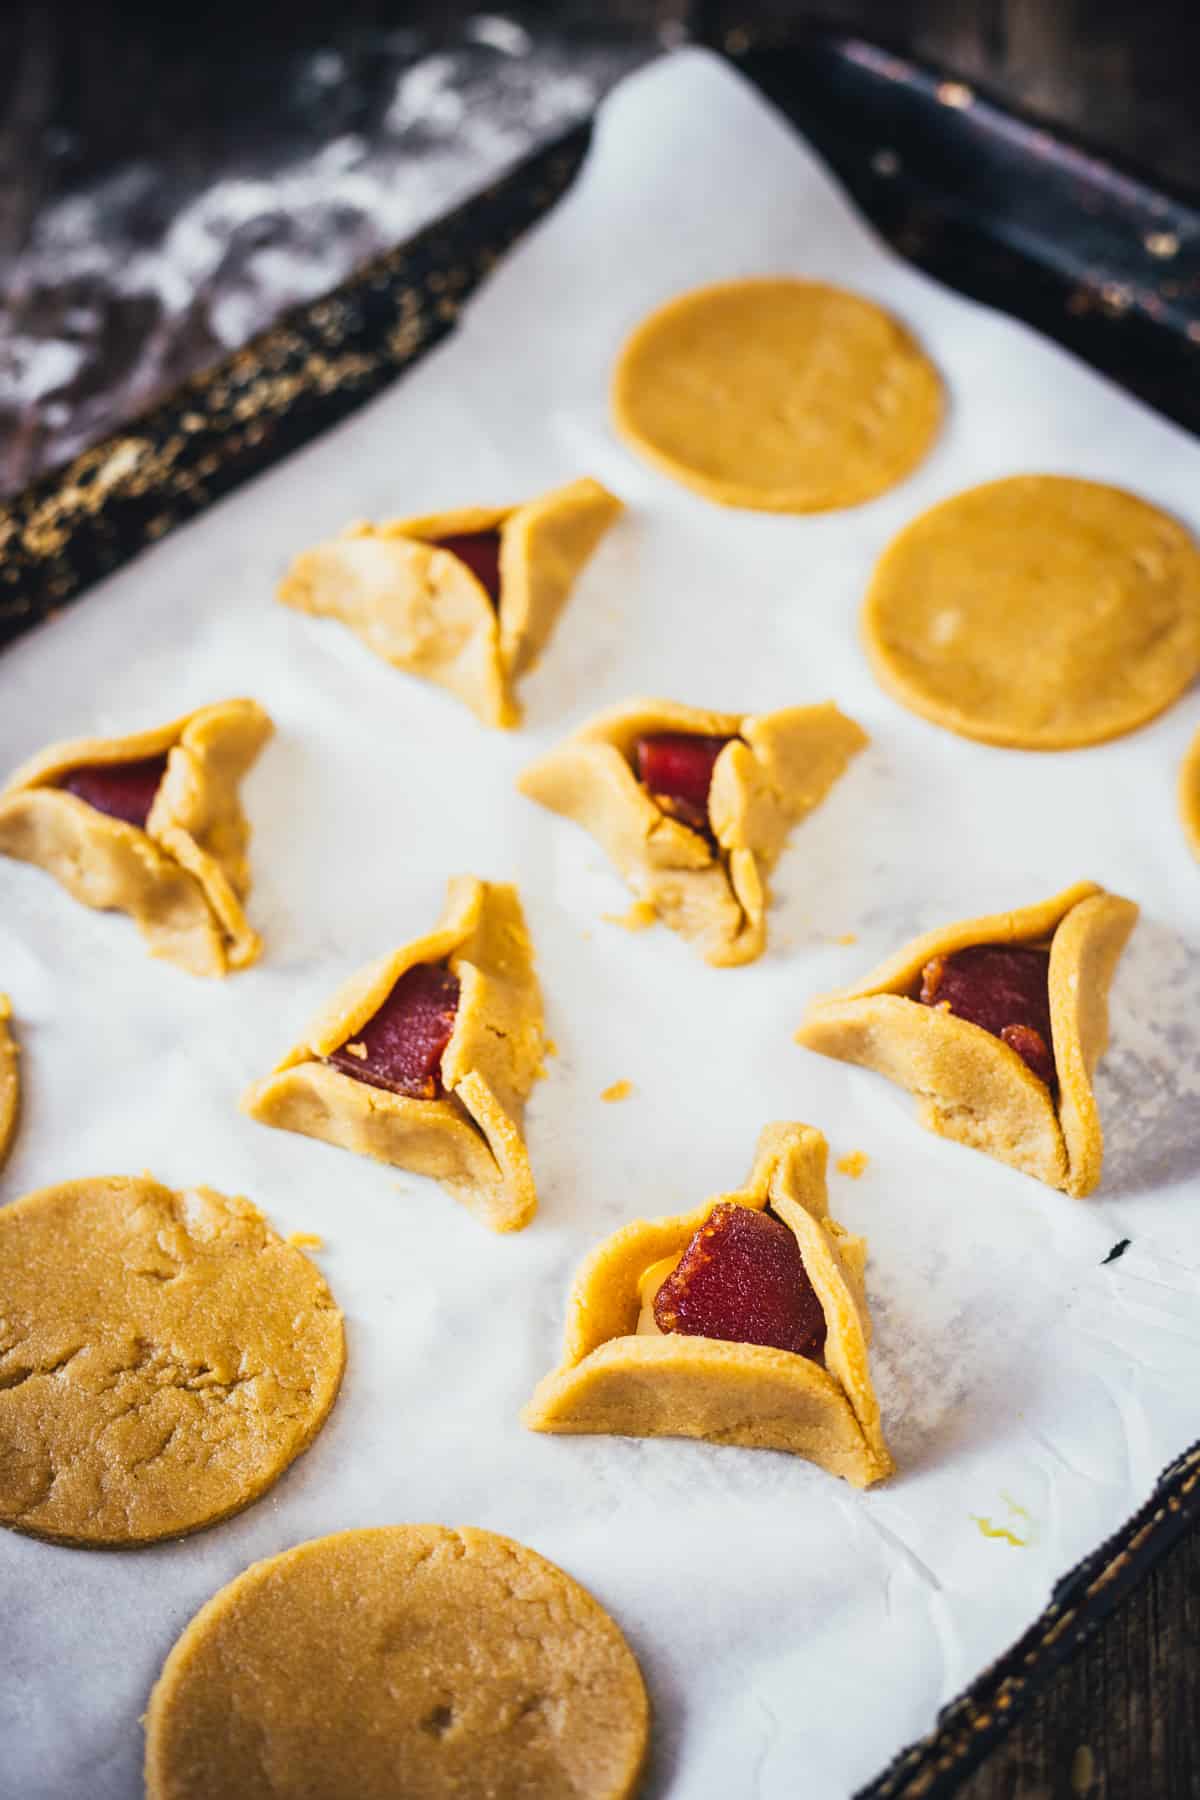 Unbaked guava and cheese hamantaschen cookies arranged on a parchment paper, with some cookies in a triangular shape and one appearing as a circle of dough.